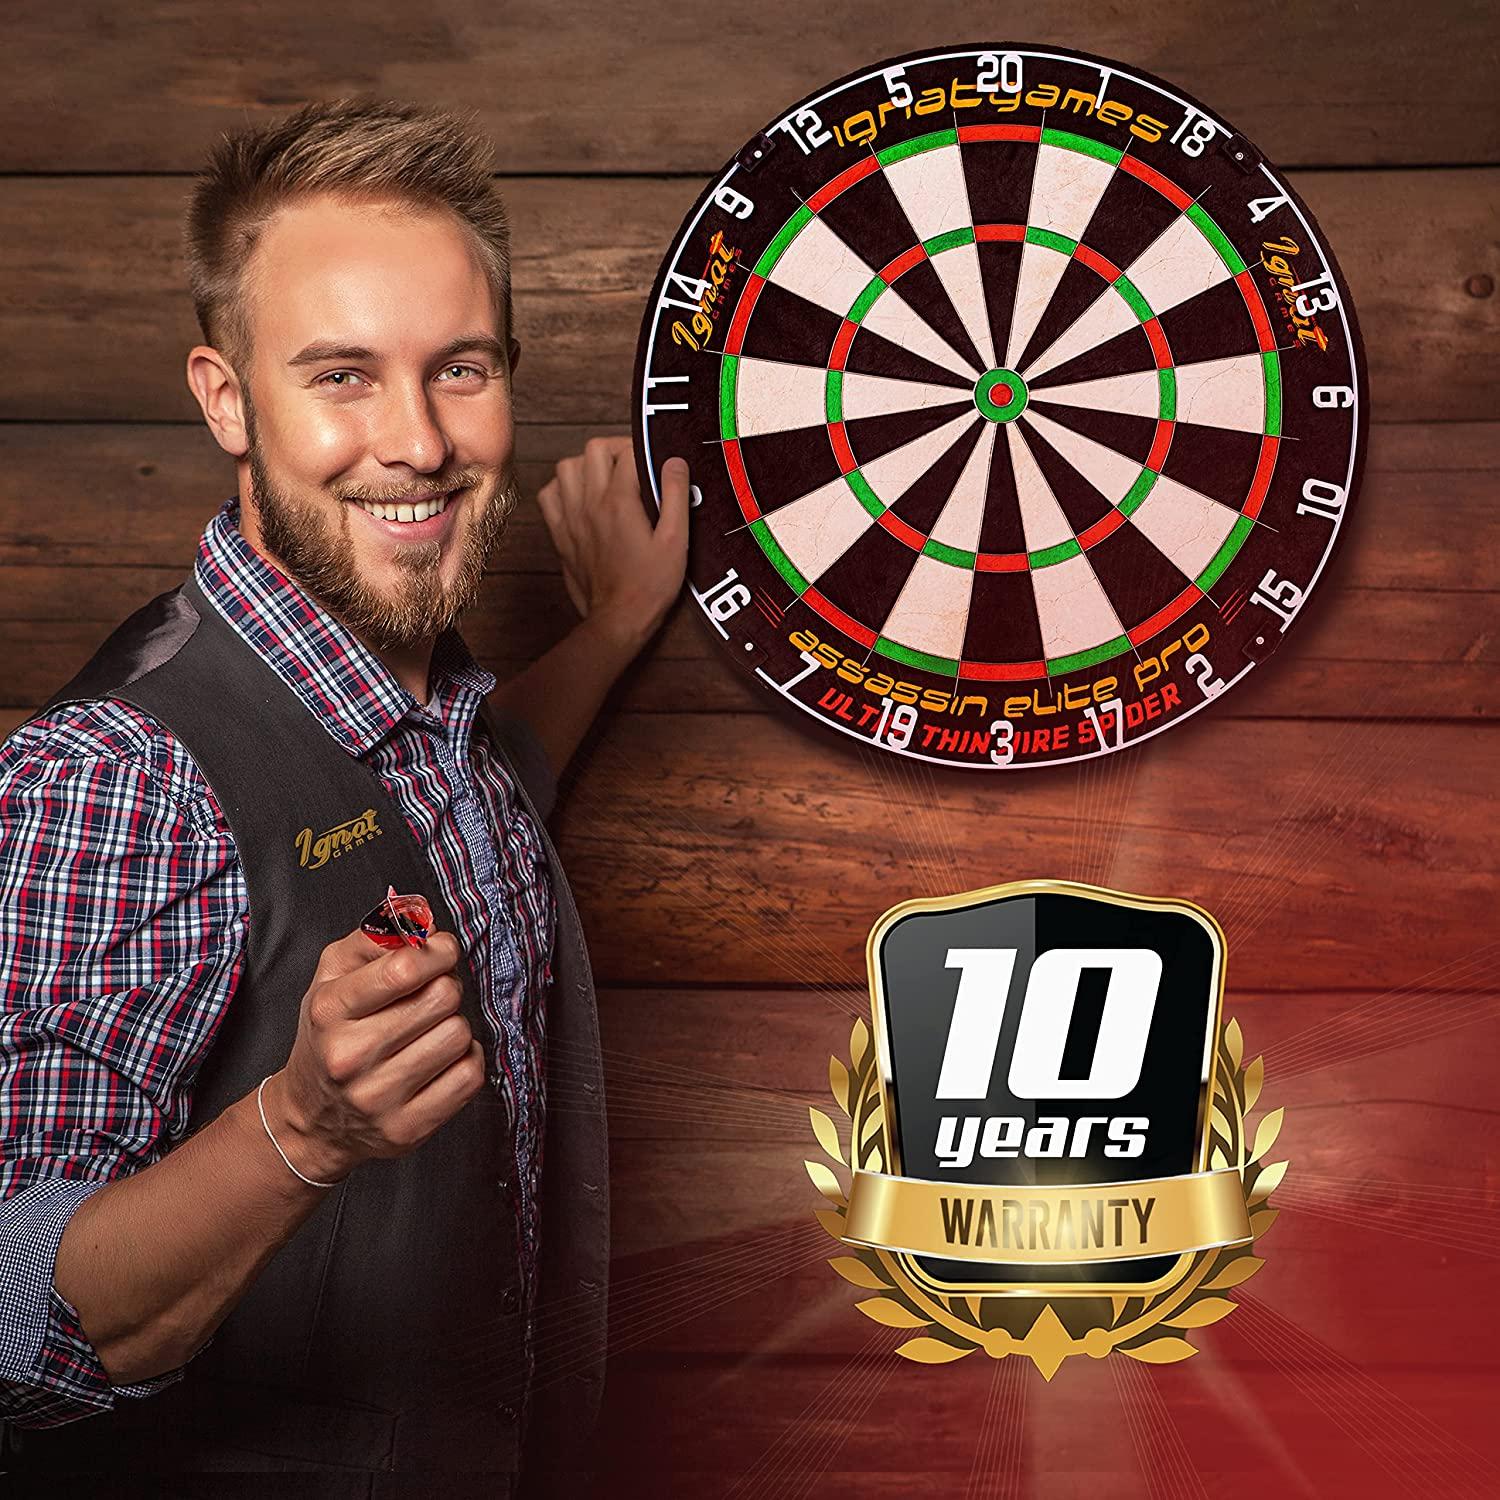 IgnatGames Dart Board Professional Set - Competition Size Kenyan Sisal Dart  Board for Adults with 6 Professional Steel Darts - Staple-Free Ultra-Thin